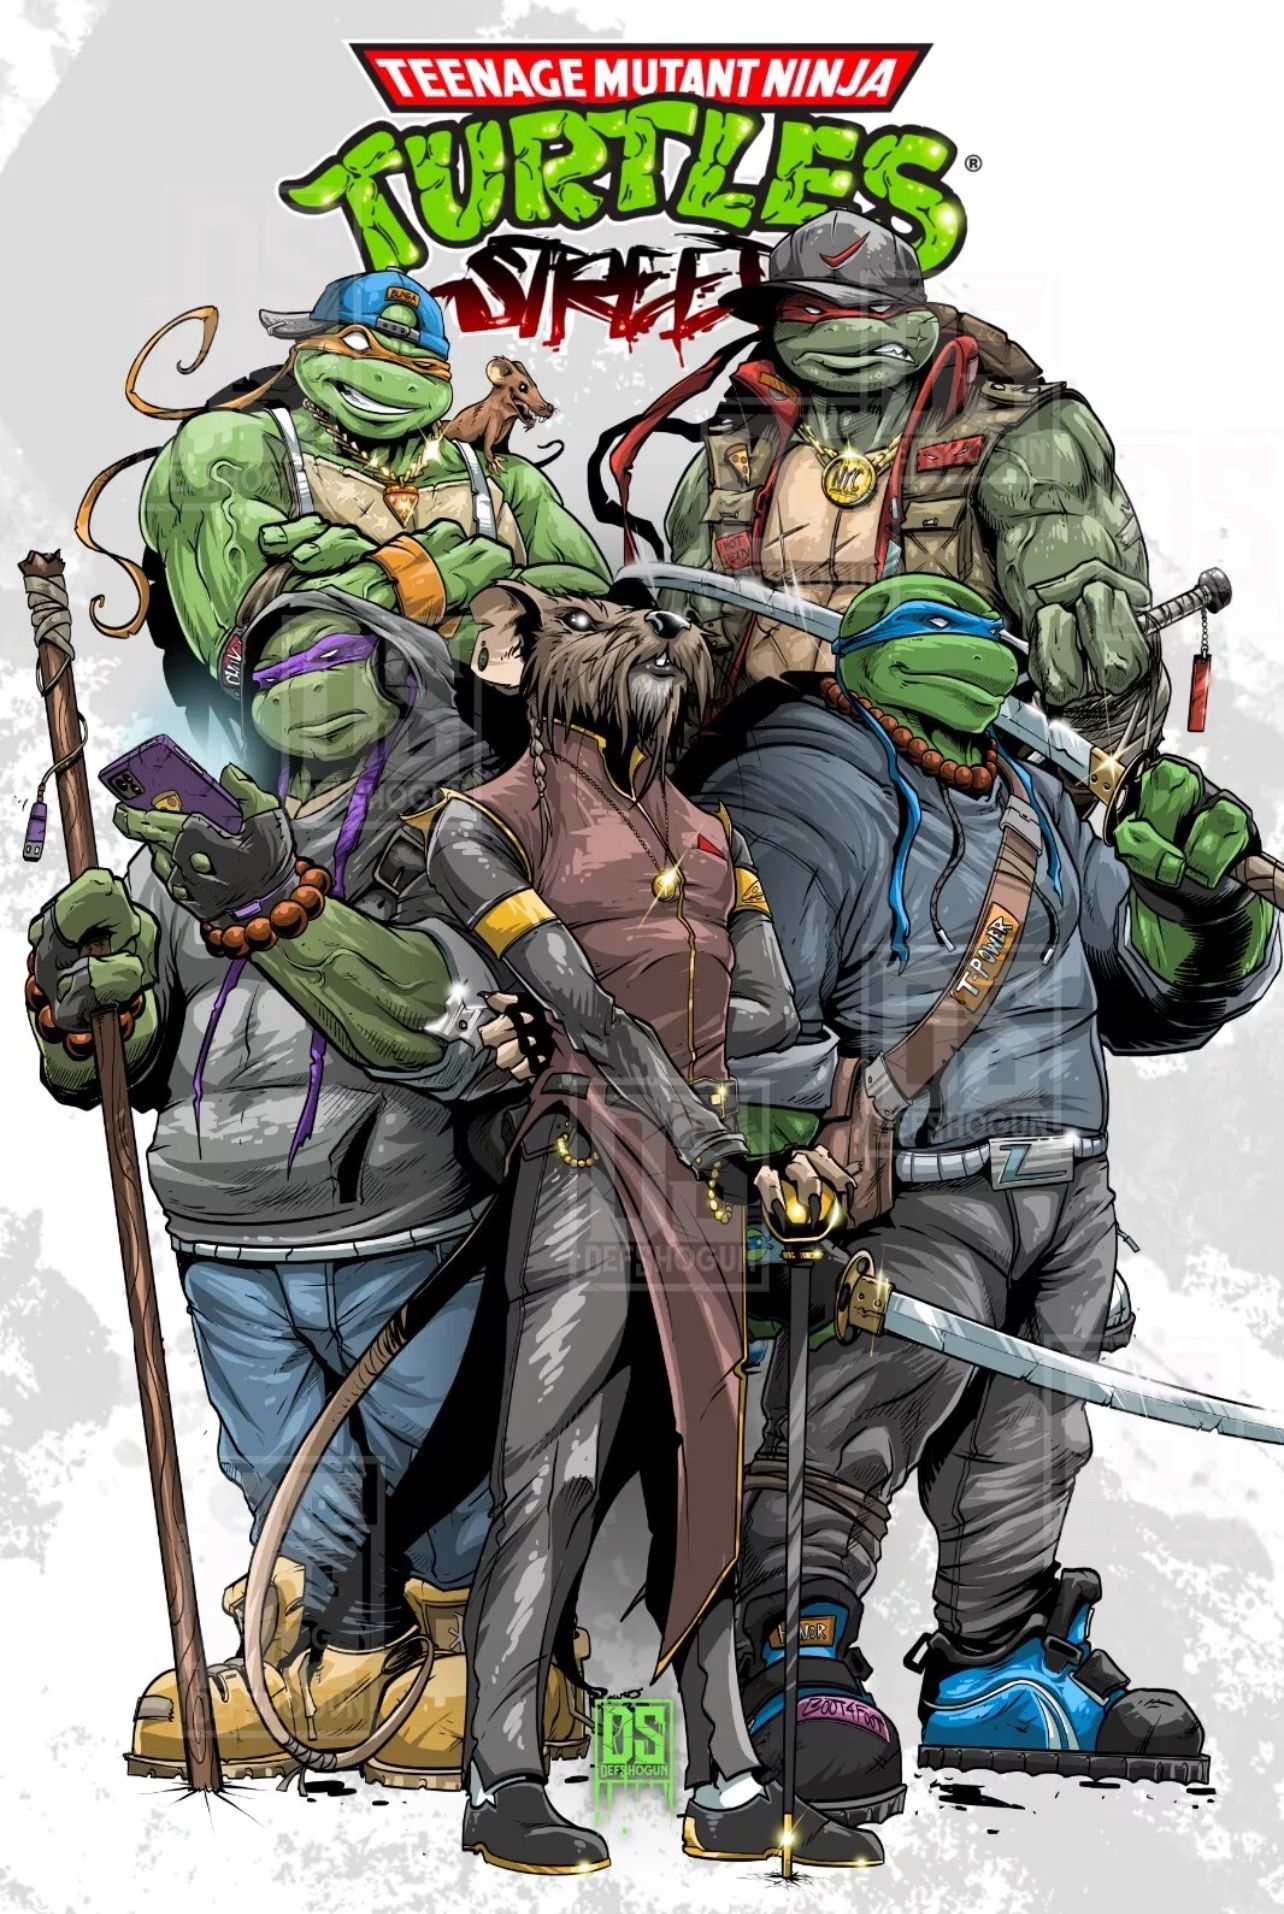 TMNT art Print 12”x18” Signed By The Artist